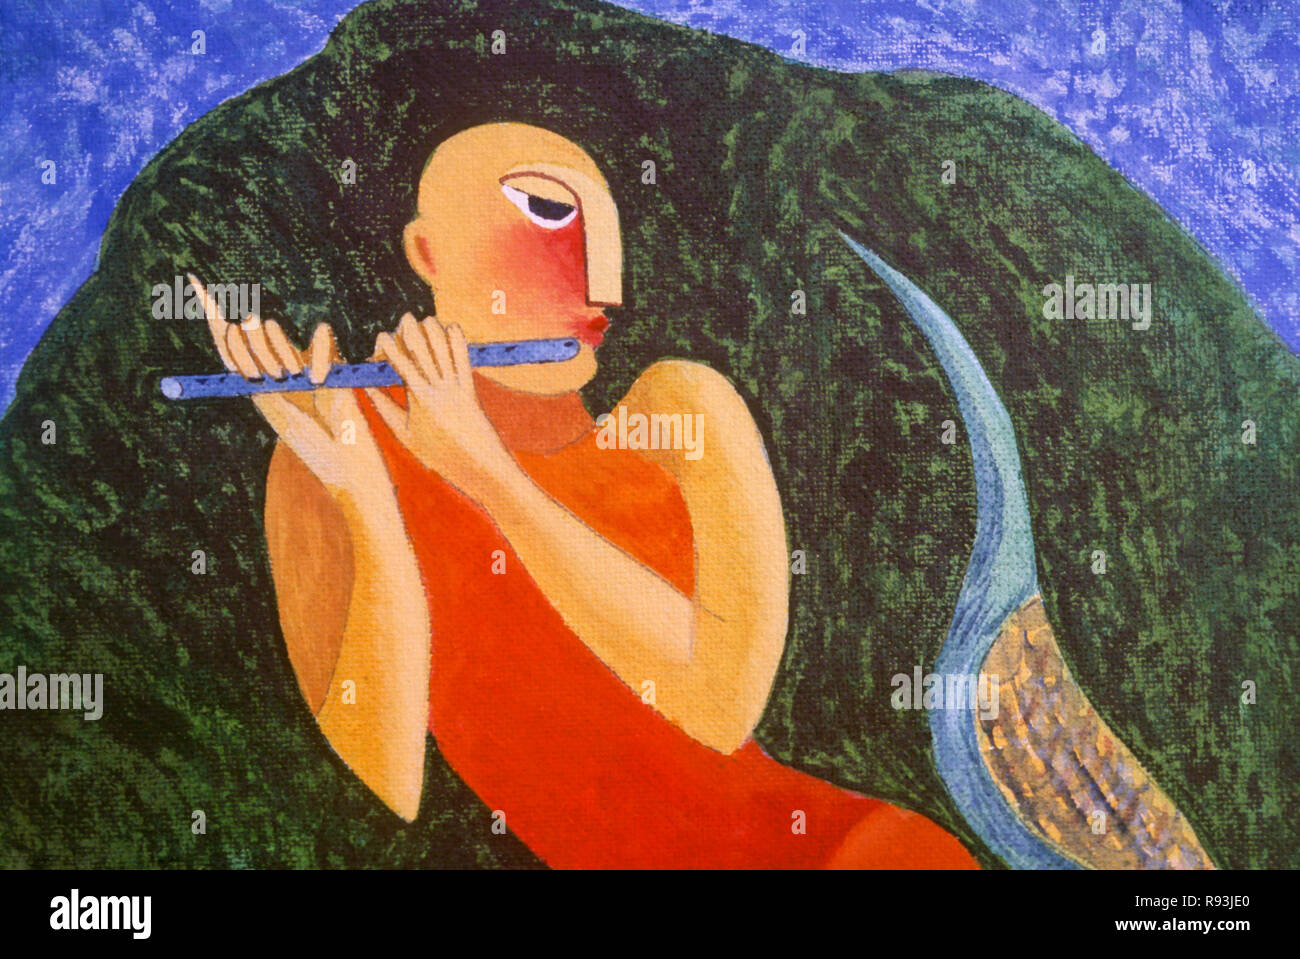 Painting of person playing flute Stock Photo